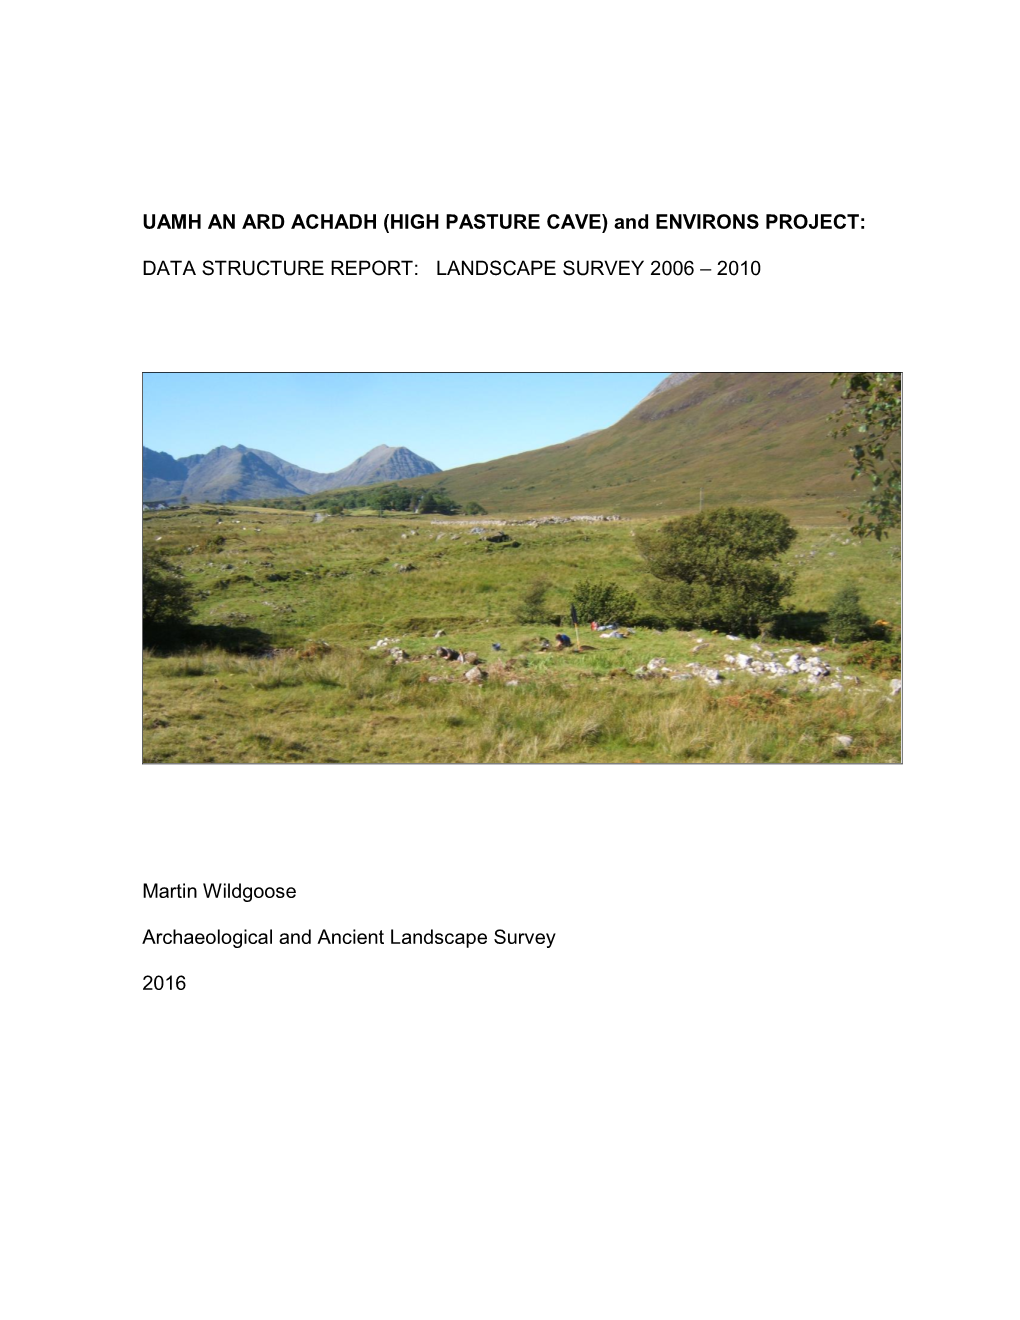 UAMH an ARD ACHADH (HIGH PASTURE CAVE) and ENVIRONS PROJECT